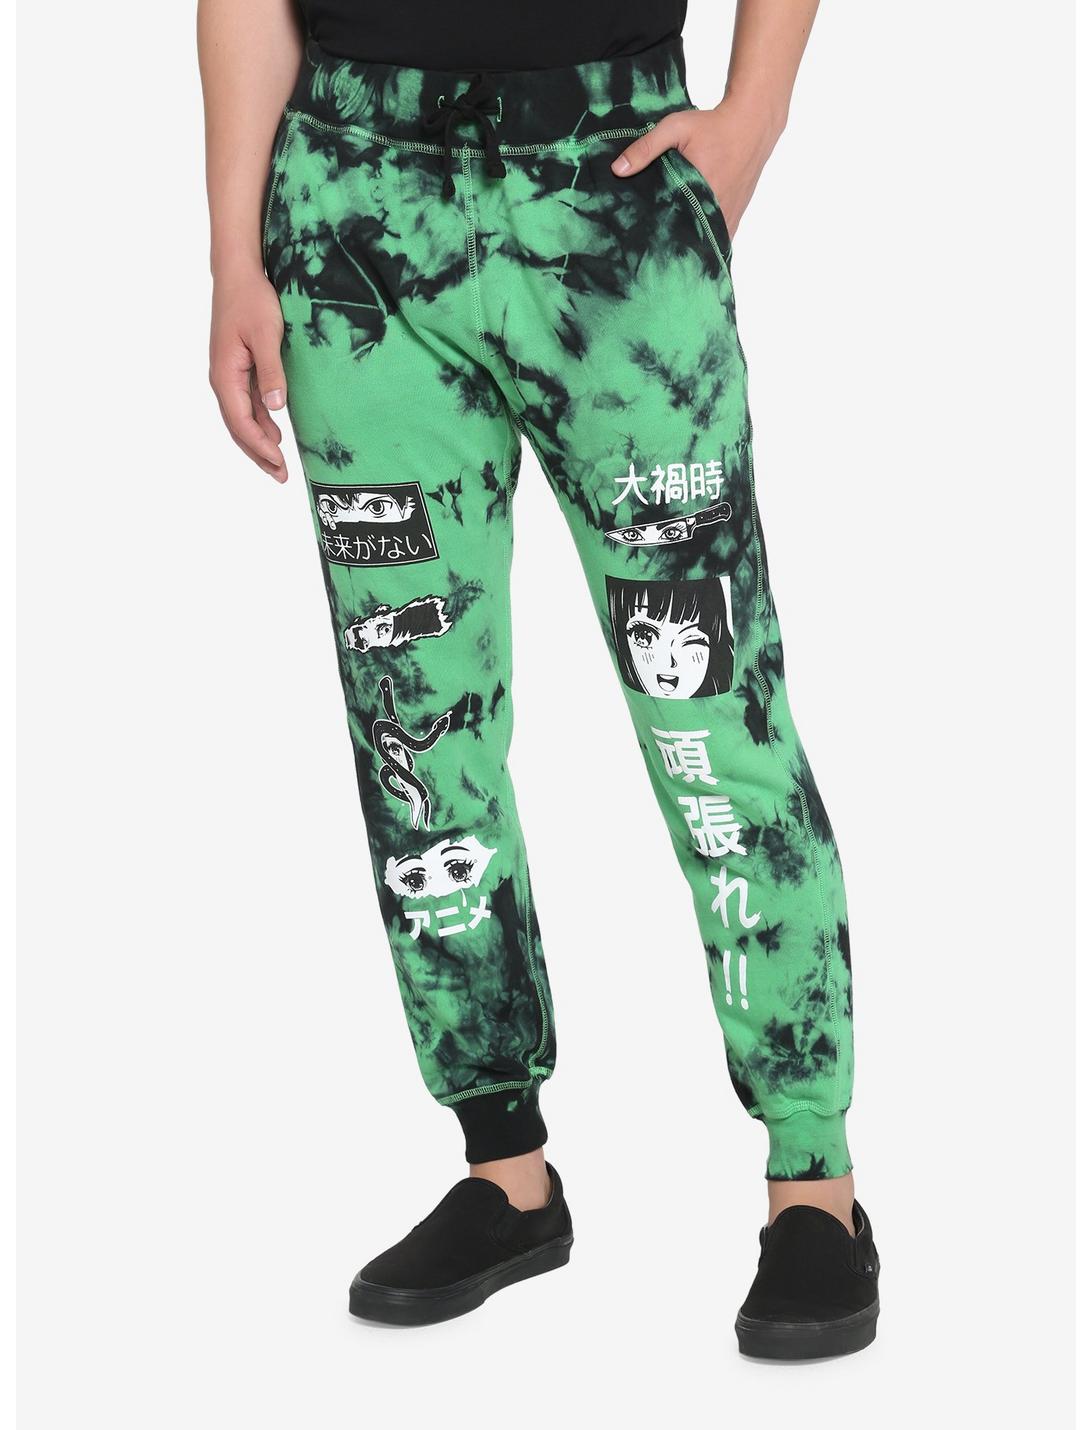 Japanese Text Icons Tie-Dye Sweatpants, GREEN, hi-res